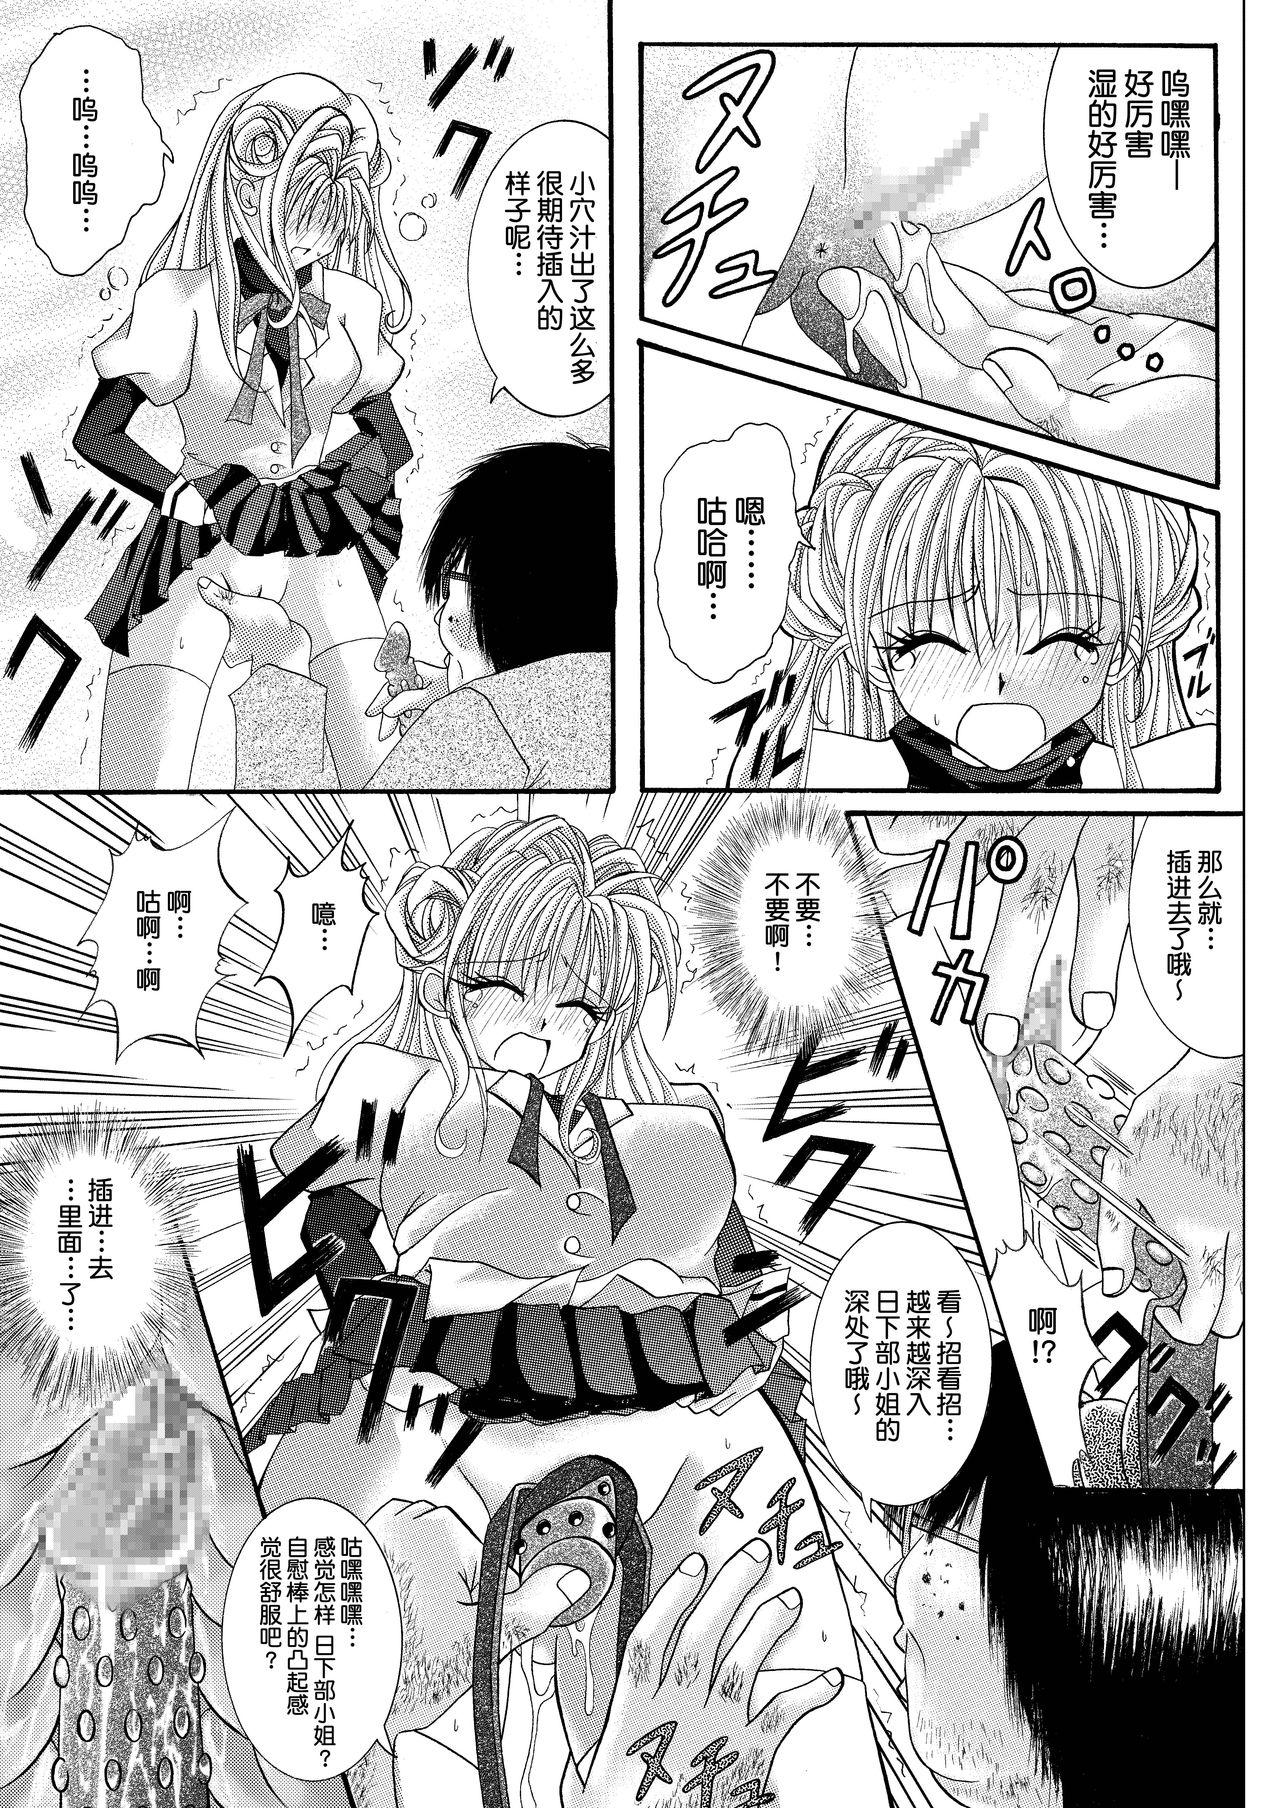 Japan Rogue Spear 208 Download edition - Kamikaze kaitou jeanne Online - Page 13